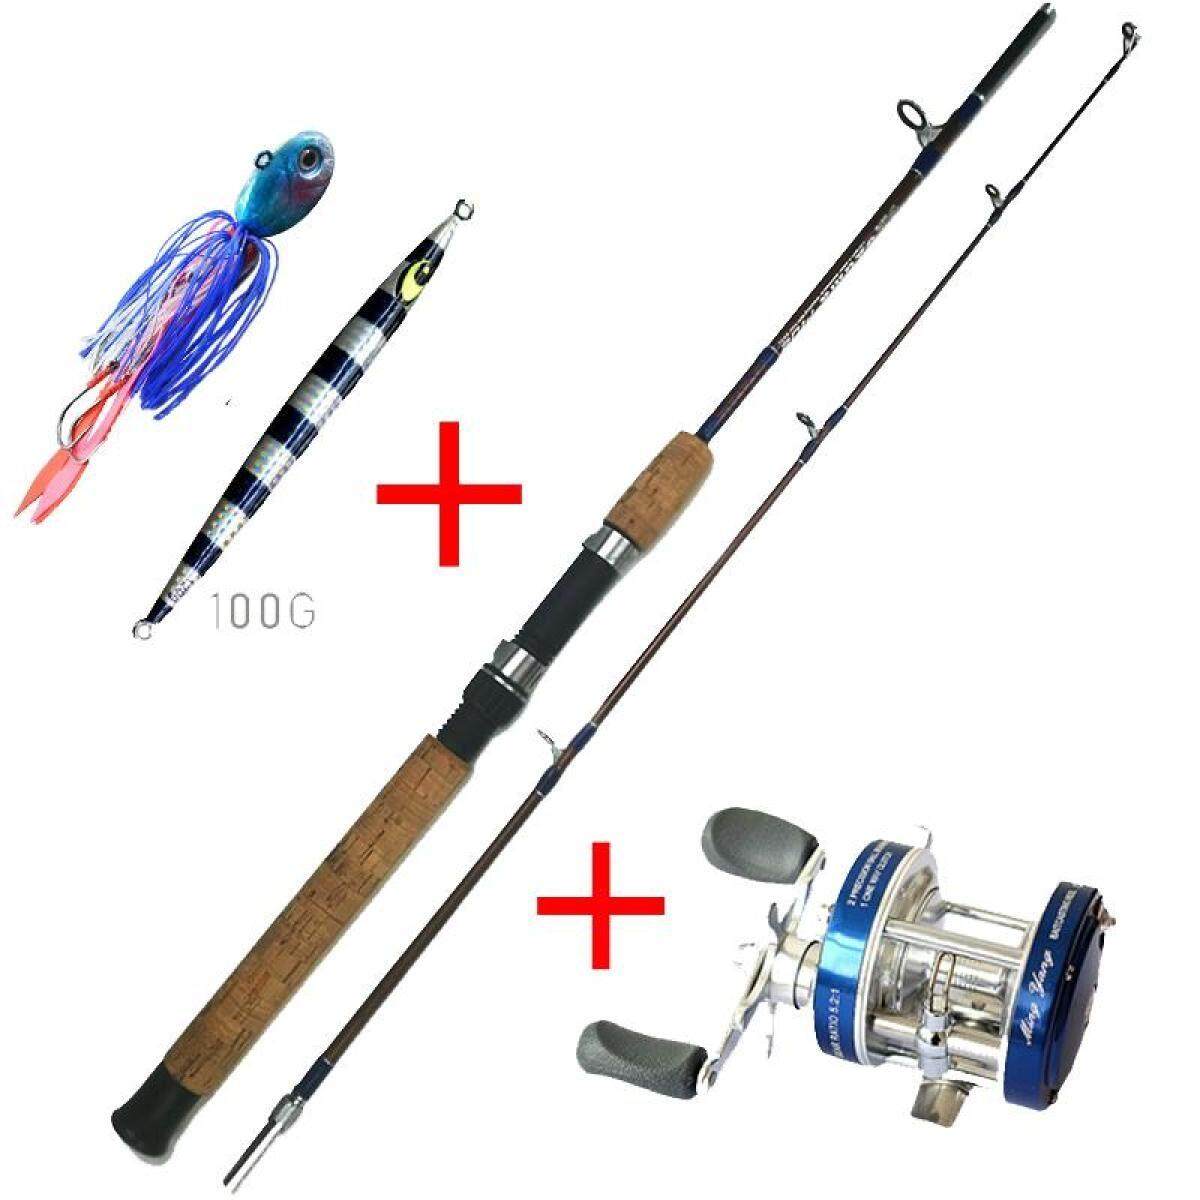 1.4M High Quality Trolling Boat Fishing Rod Saltwater Fishing Rod Combo With Reel and Jigs Lure - intl